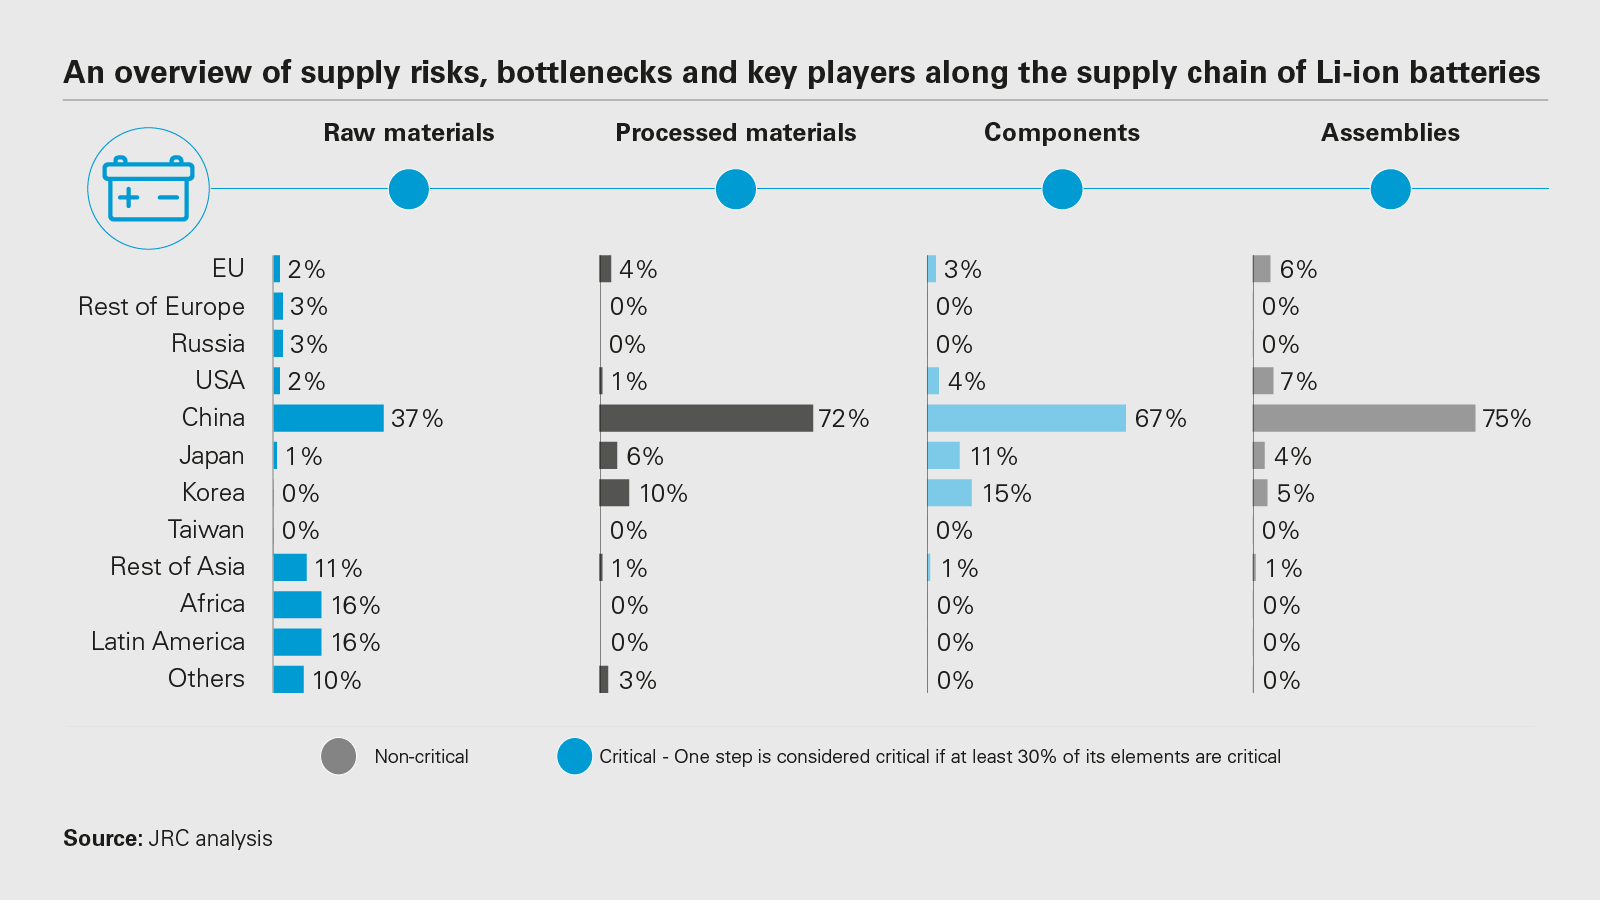 An overview of supply risks, bottlenecks and key players along the supply chain of Li-ion batteries